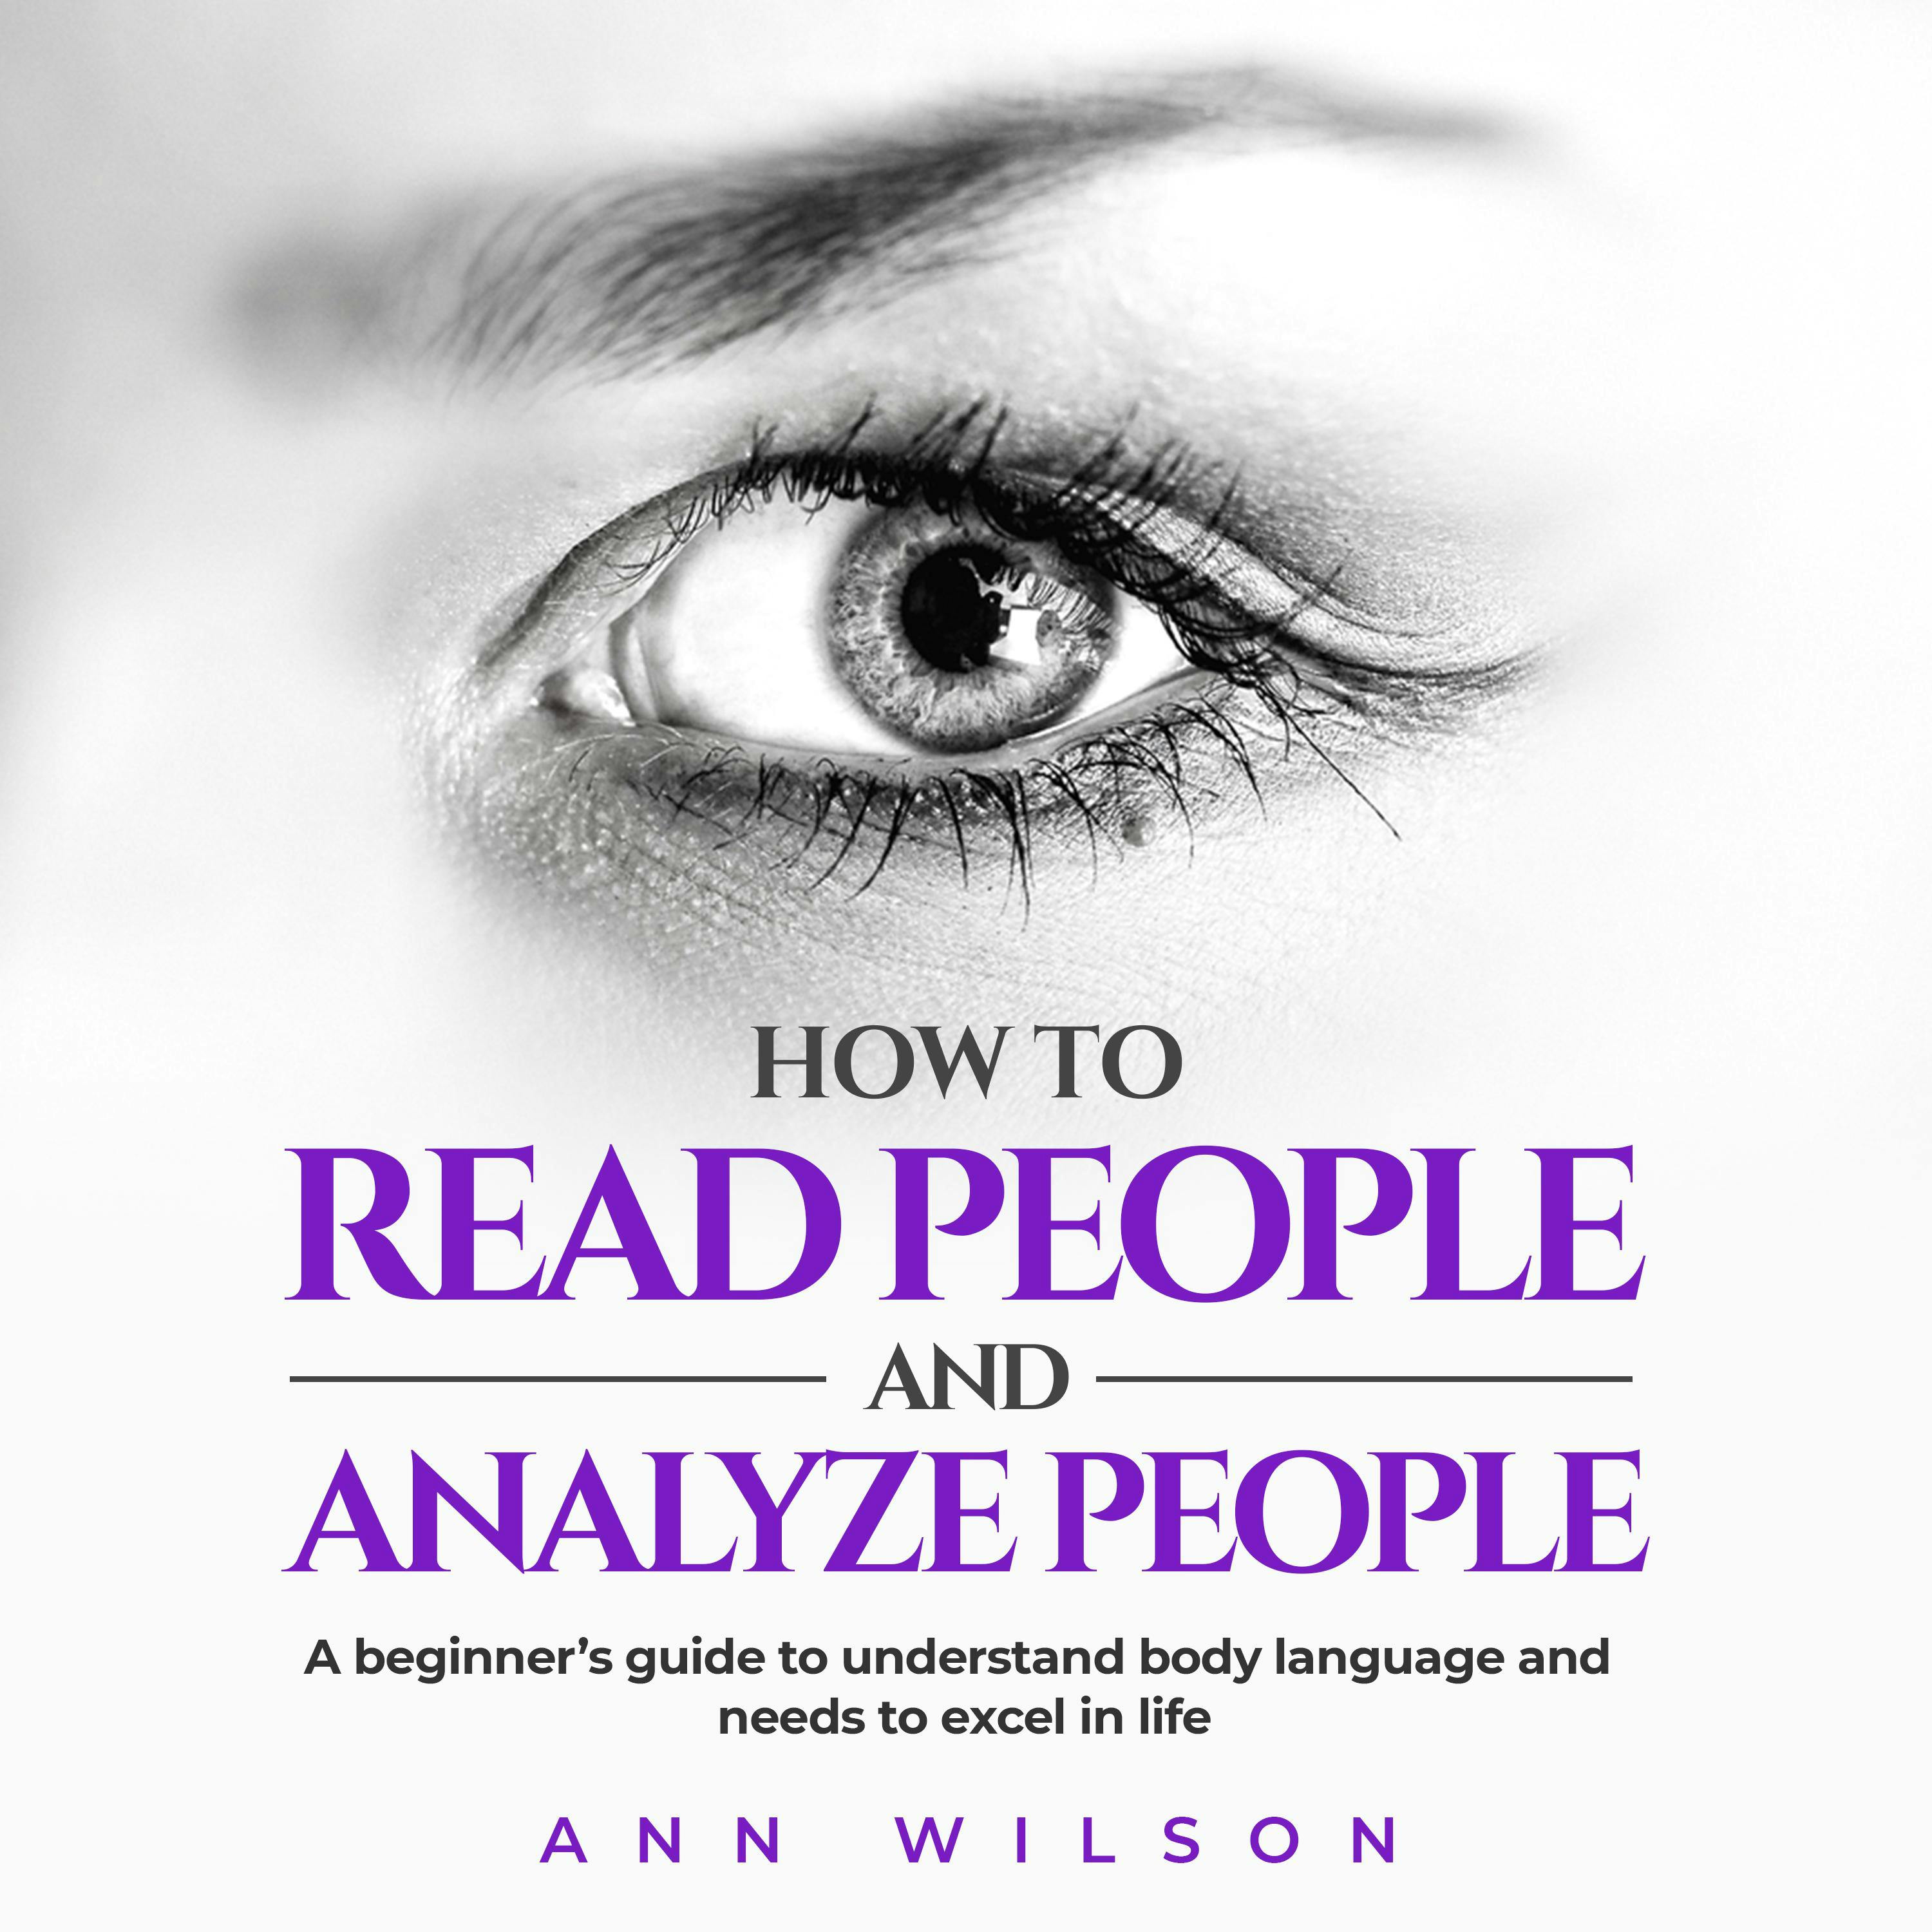 How to Read People and Analyze People: a Beginner's guide to understand body language and needs to excel in life - Ann Wilson